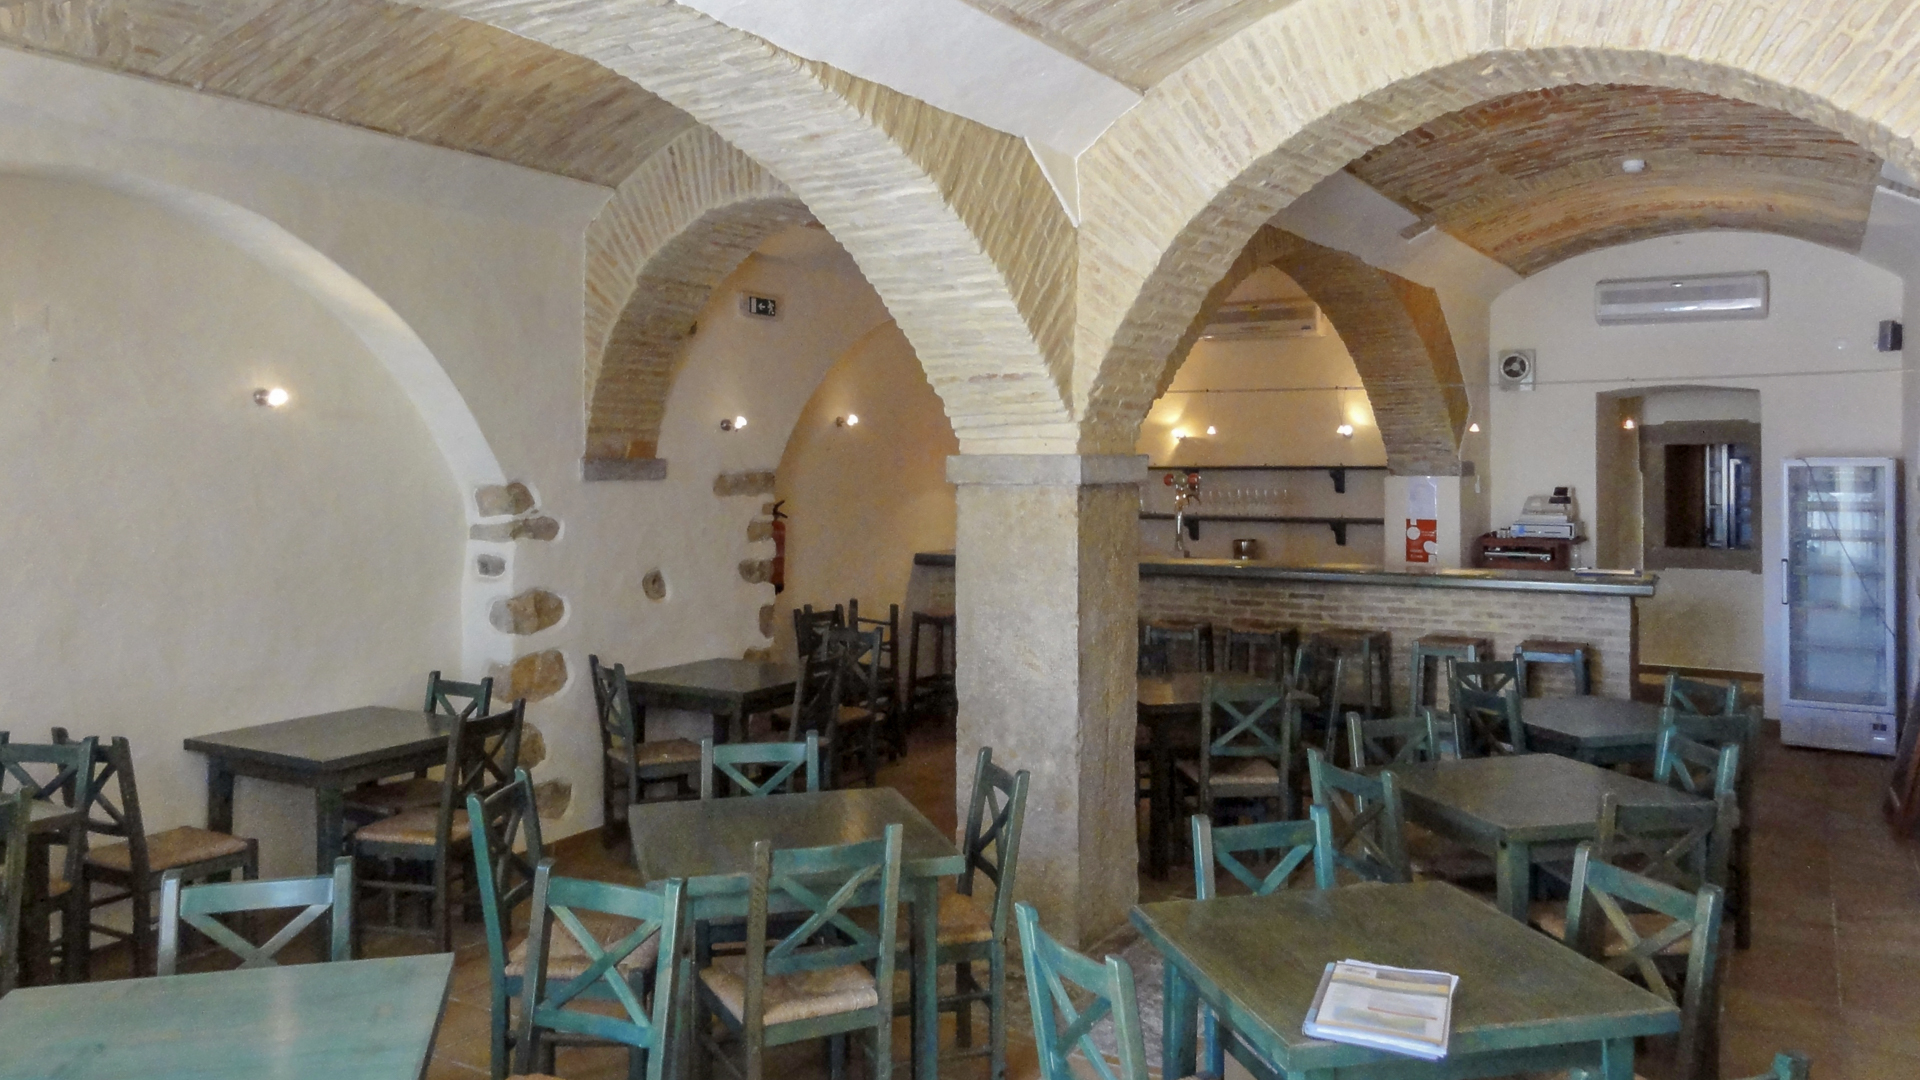 Attractive business idea with accommodation in Estoi, East Algarve | SB1177 Great business opportunity - restaurant with 53 seats, with all equipment. On top, there are two independent apartments, renovated and with large terraces. Only a few minutes from the Pousada de Estoi.